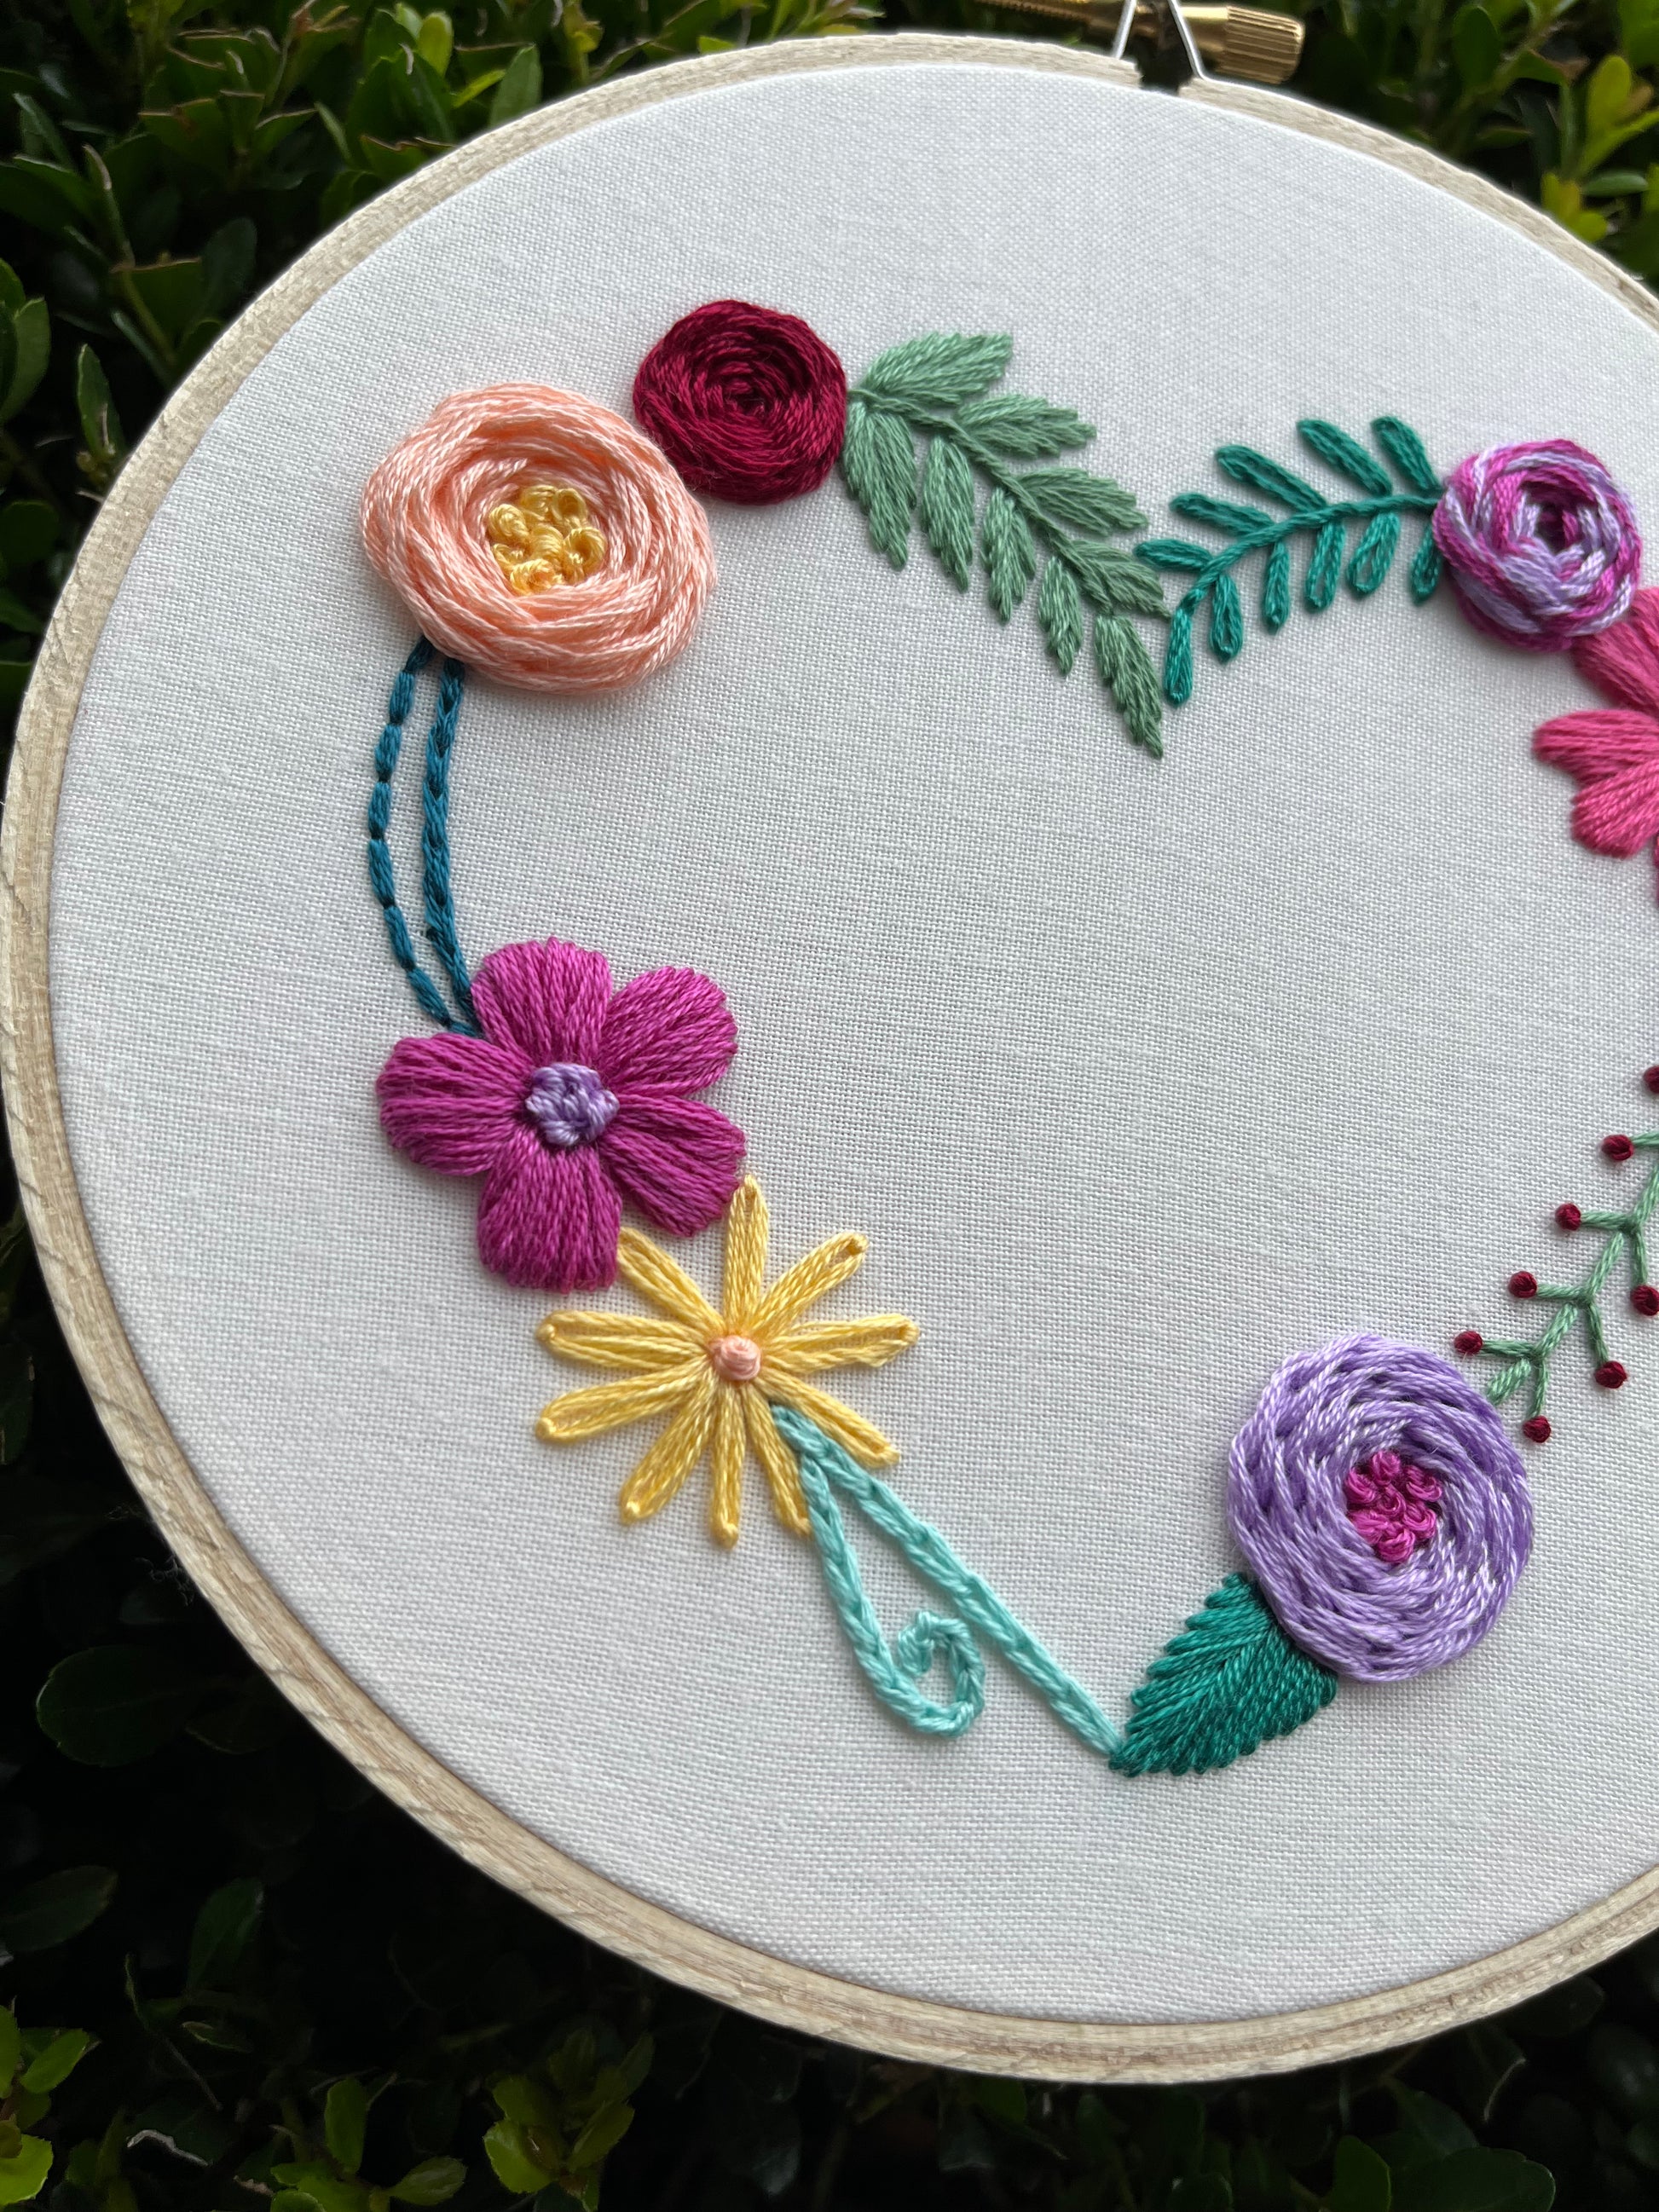 5 Floral Heart Hand Embroidery Patterns – Needle Work